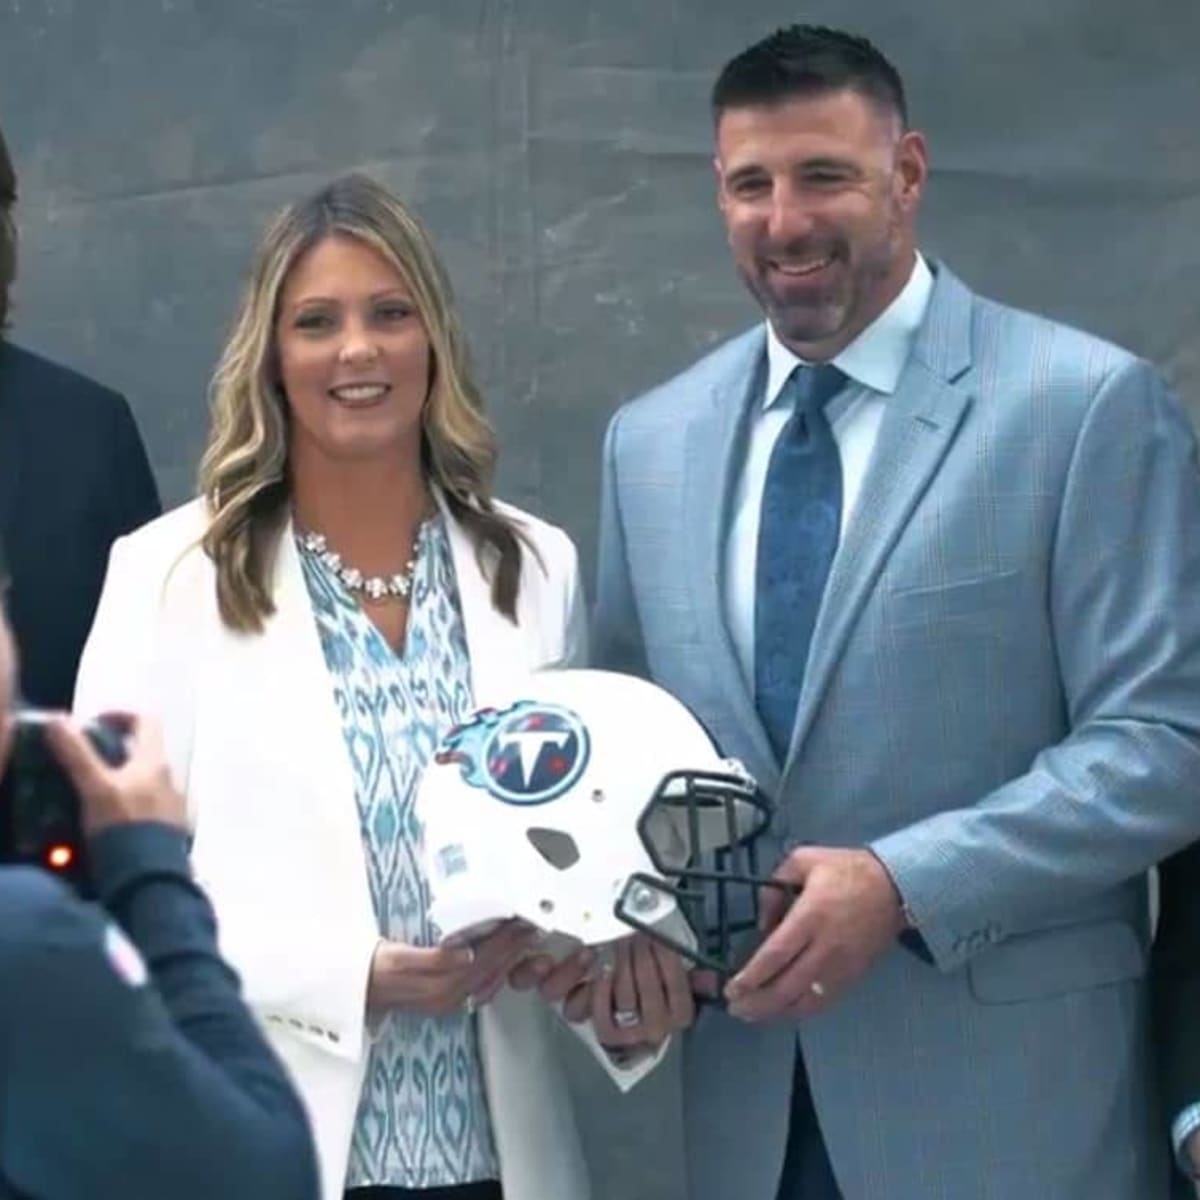 Image of Mike Vrabel with his wife, Jen Vrabel